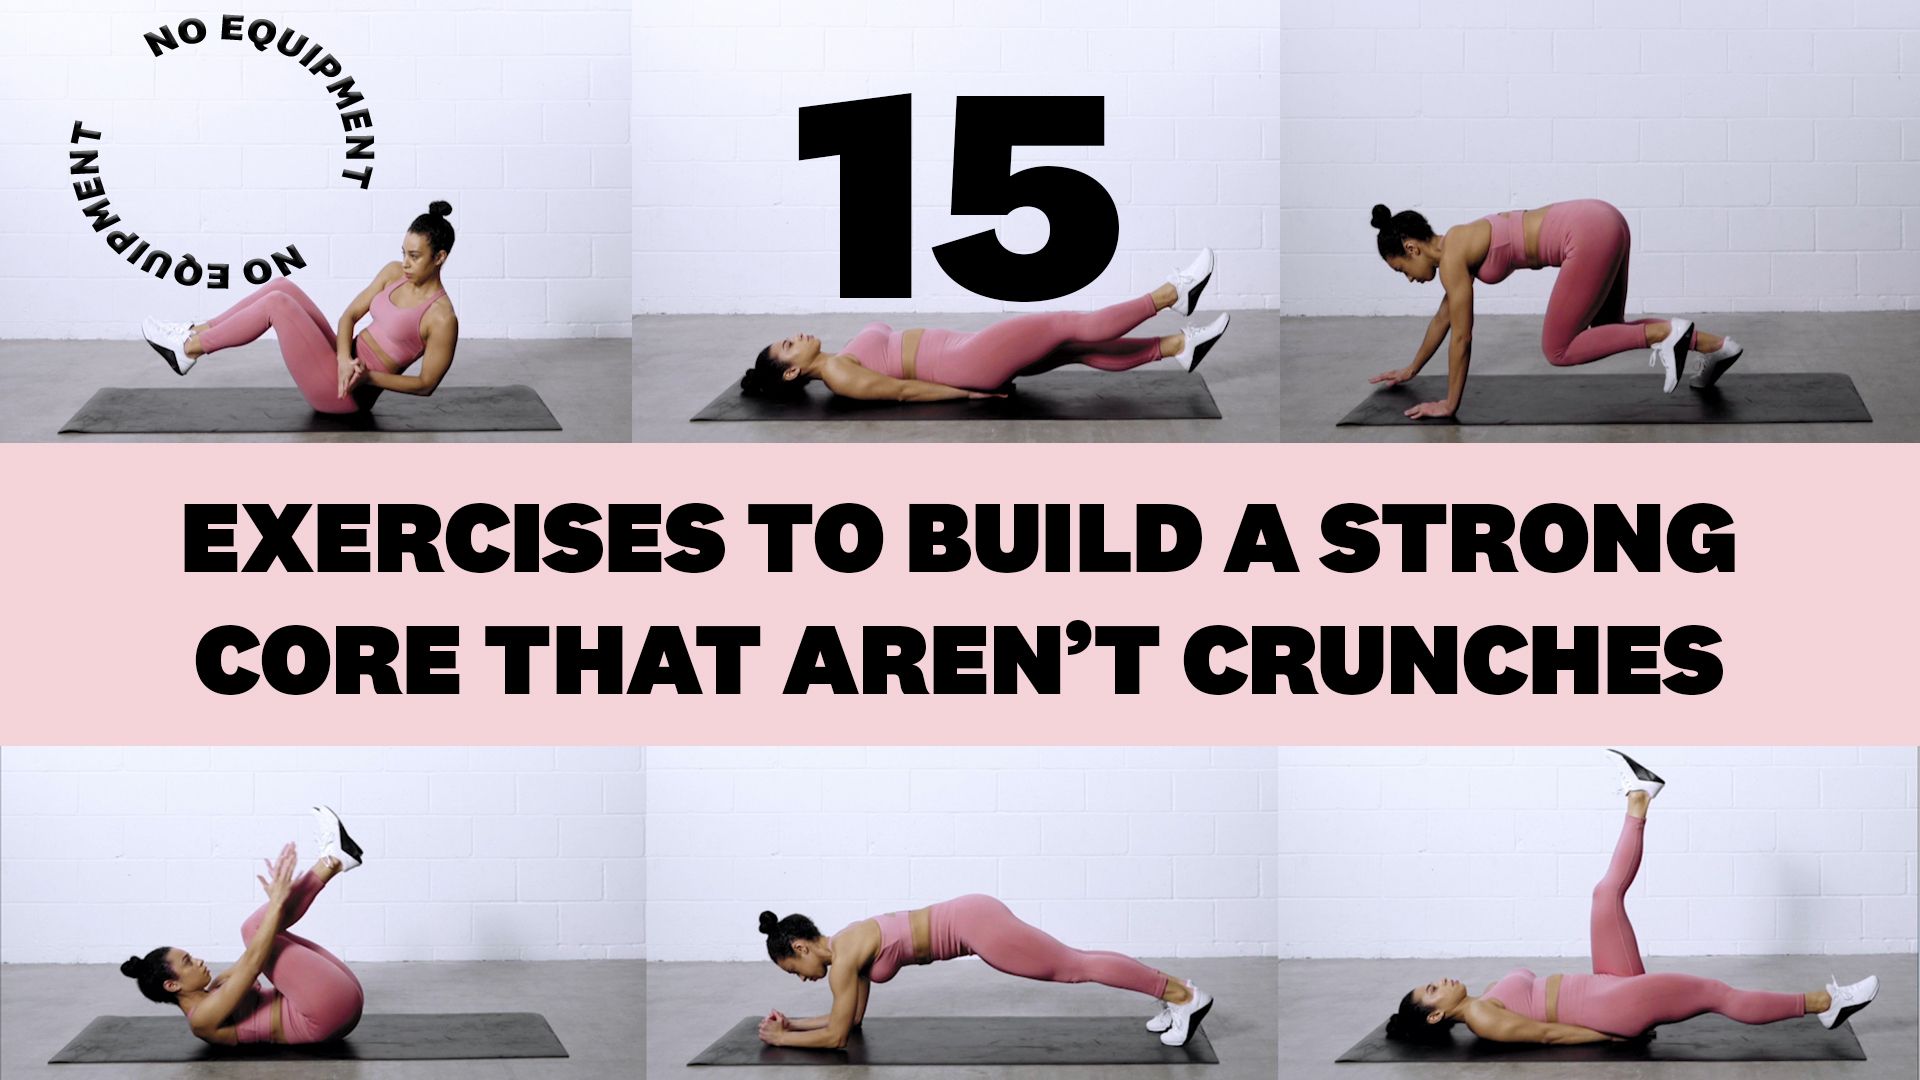 How to Do a Reverse Crunch Exercise Correctly